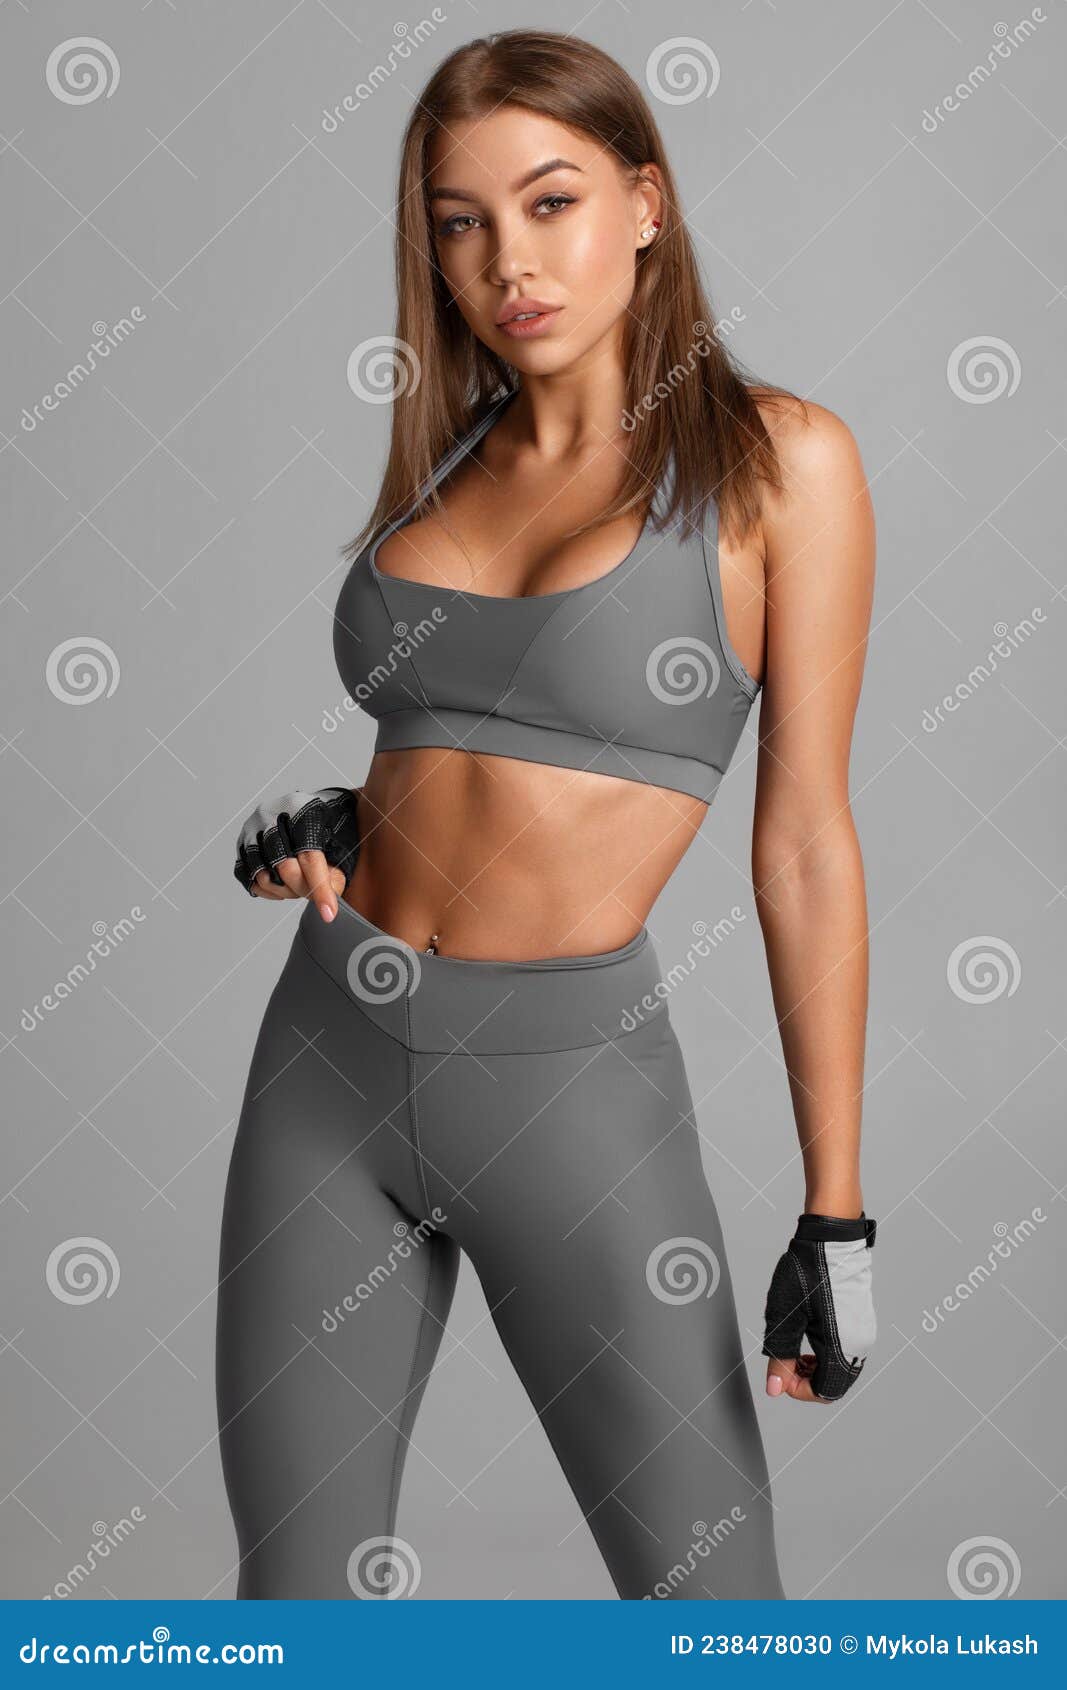 beautiful fitness woman. athletic girl on the gray background